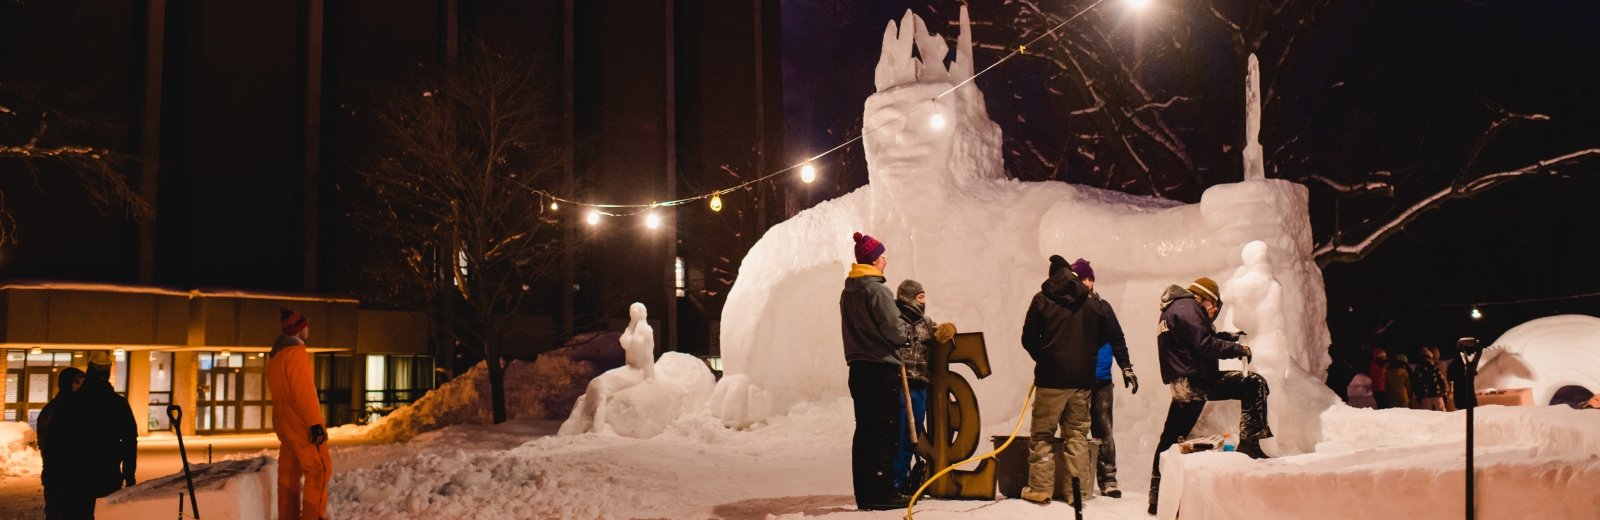 Working in the snow and cold to build the best snow statue is a Tech tradition.